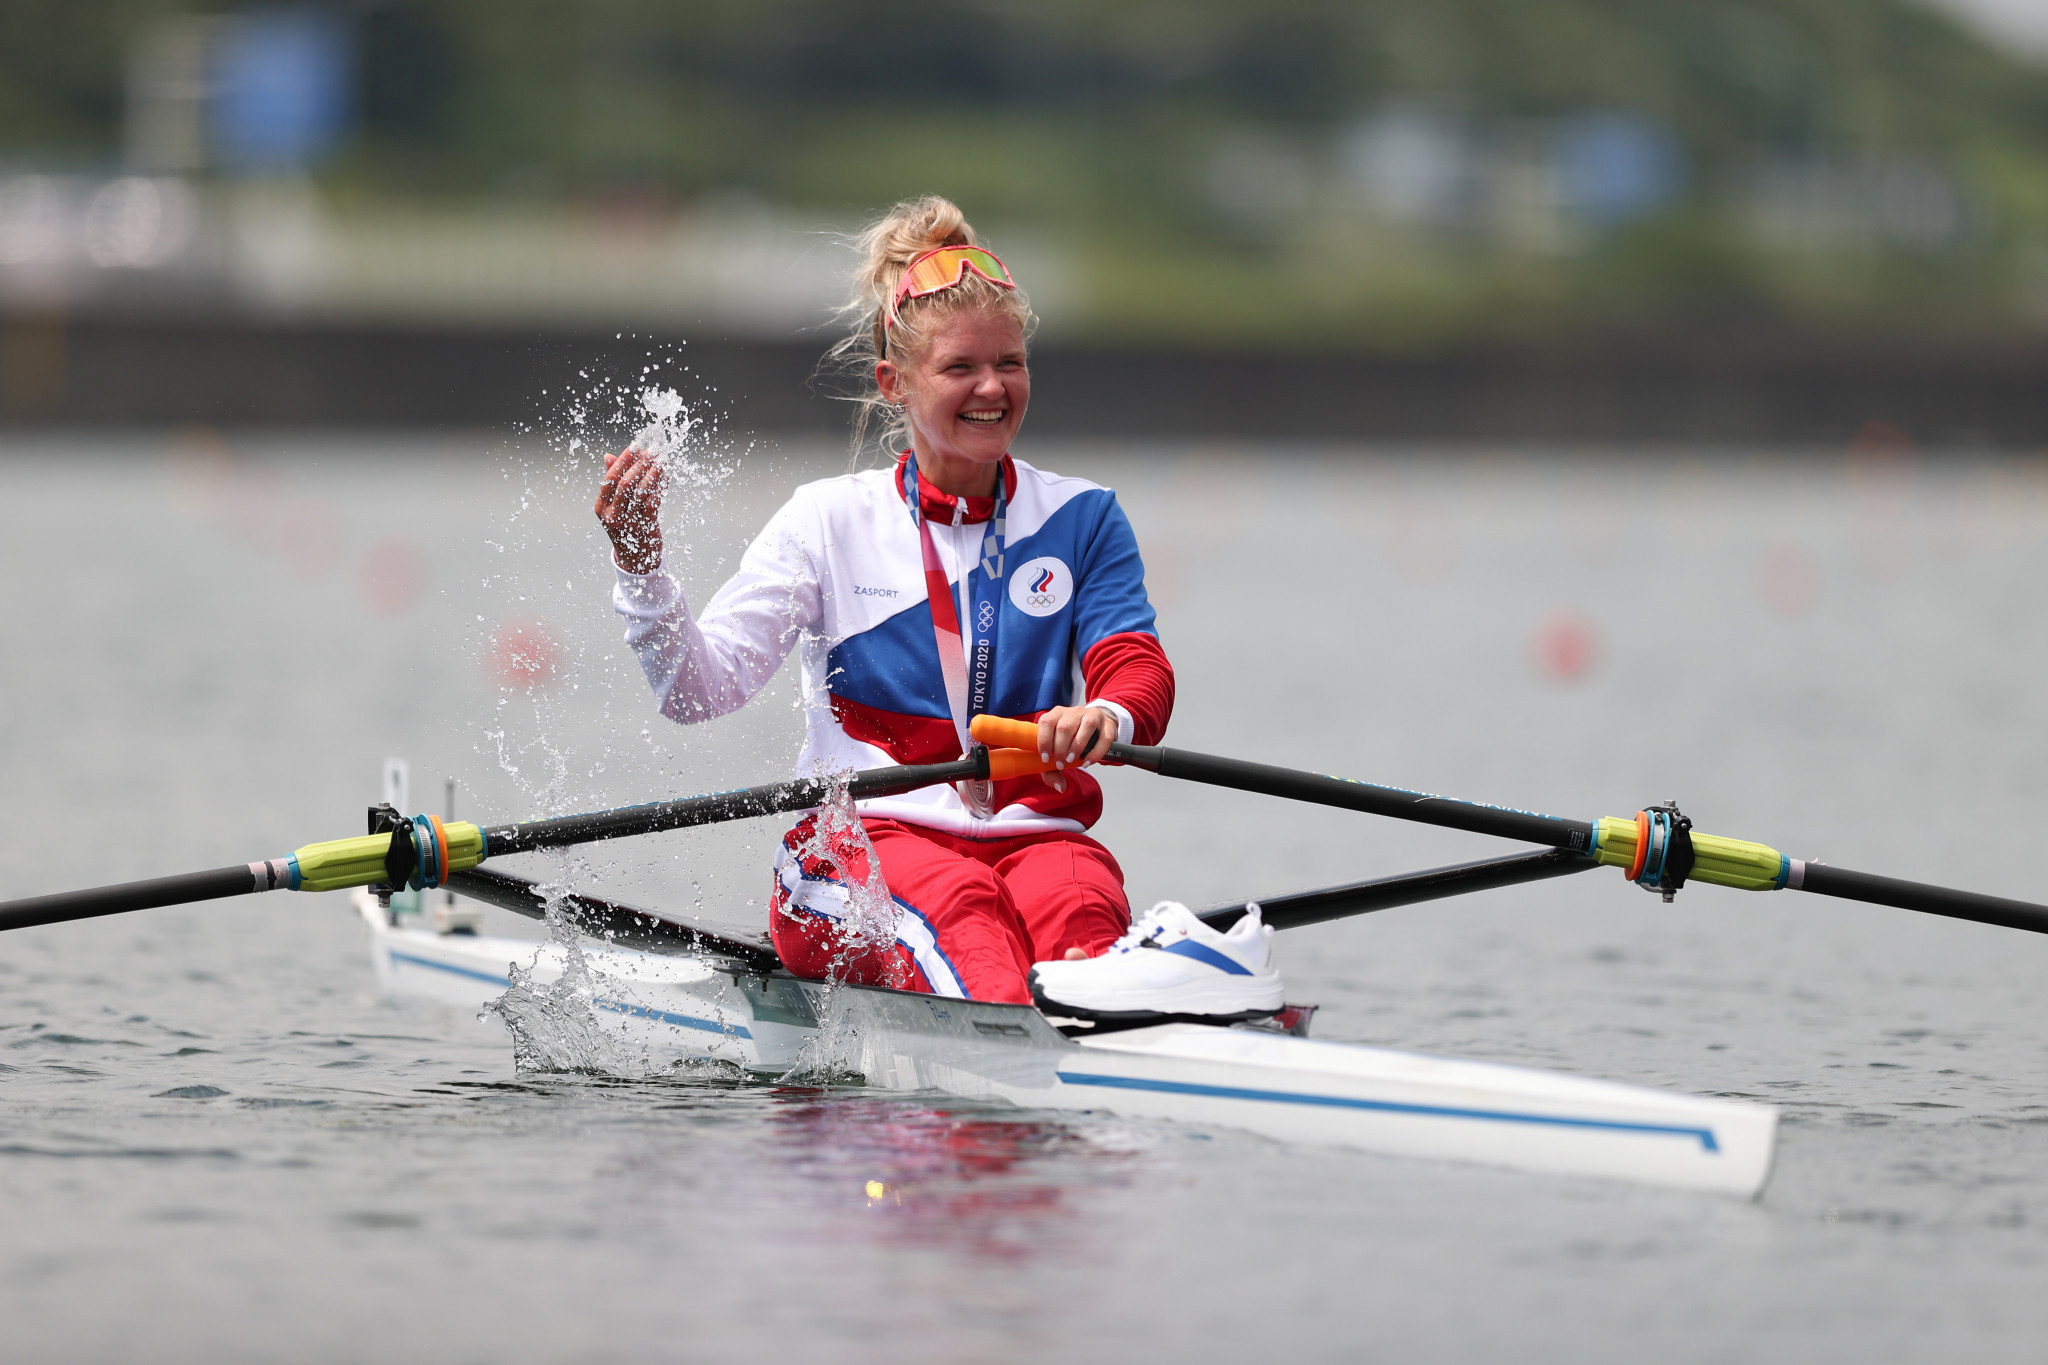 Hanna Prakatsen only transferred to the single sculls discipline in 2021 ©Getty Images